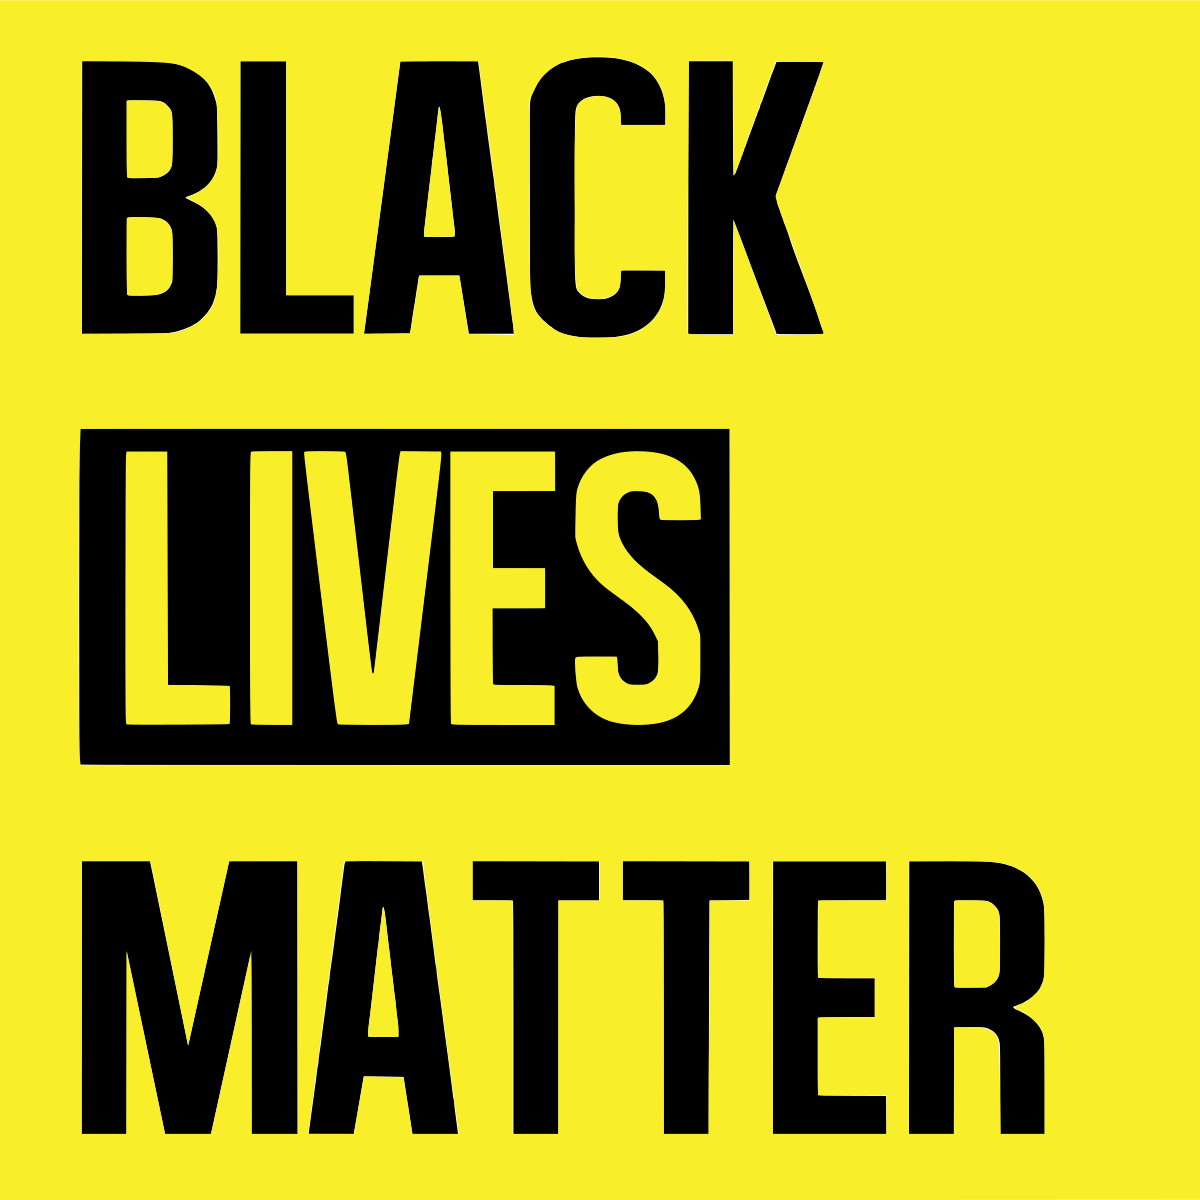 Black Lives Matter in black text on yellow background